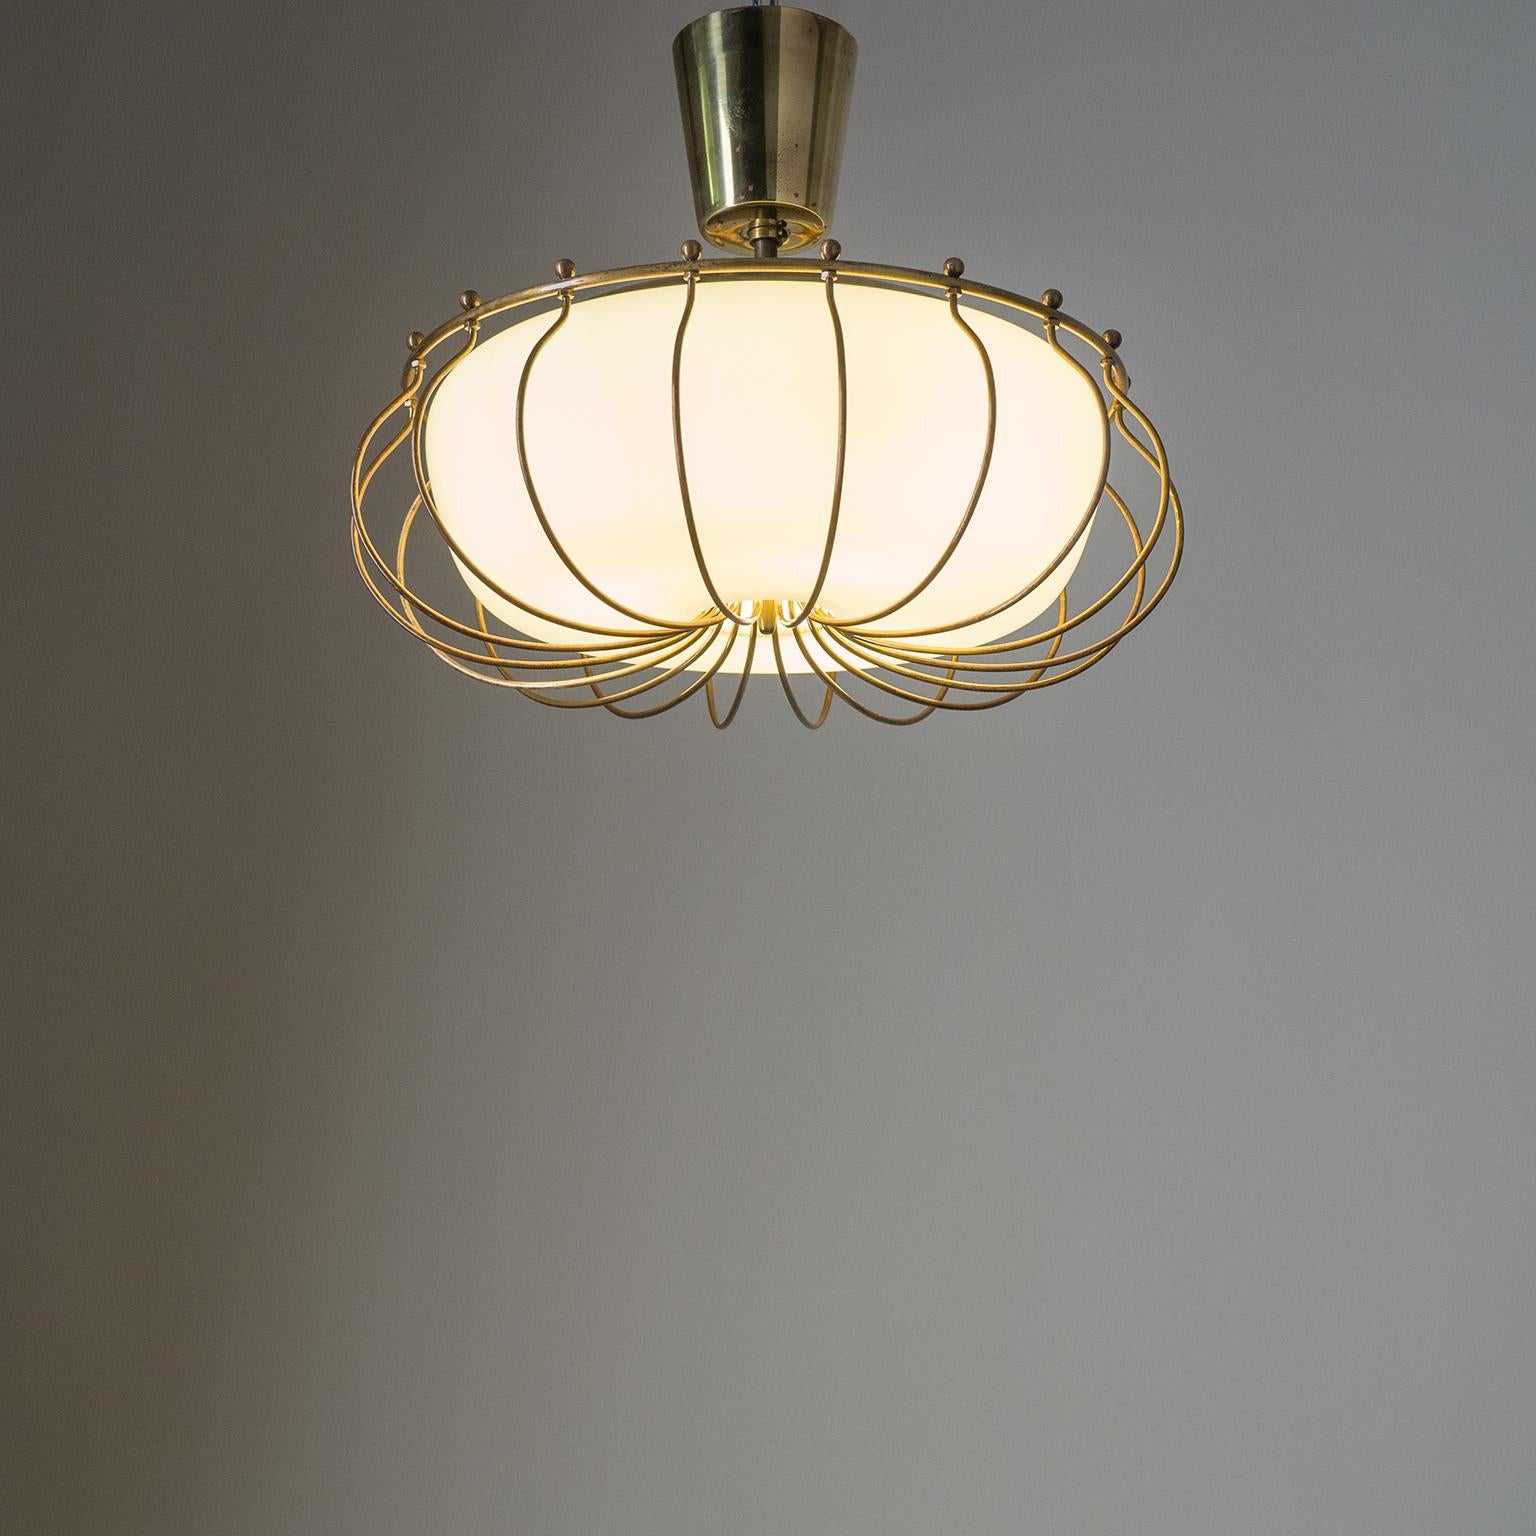 Ceiling Light, 1940s, Brass and Satin Glass 7